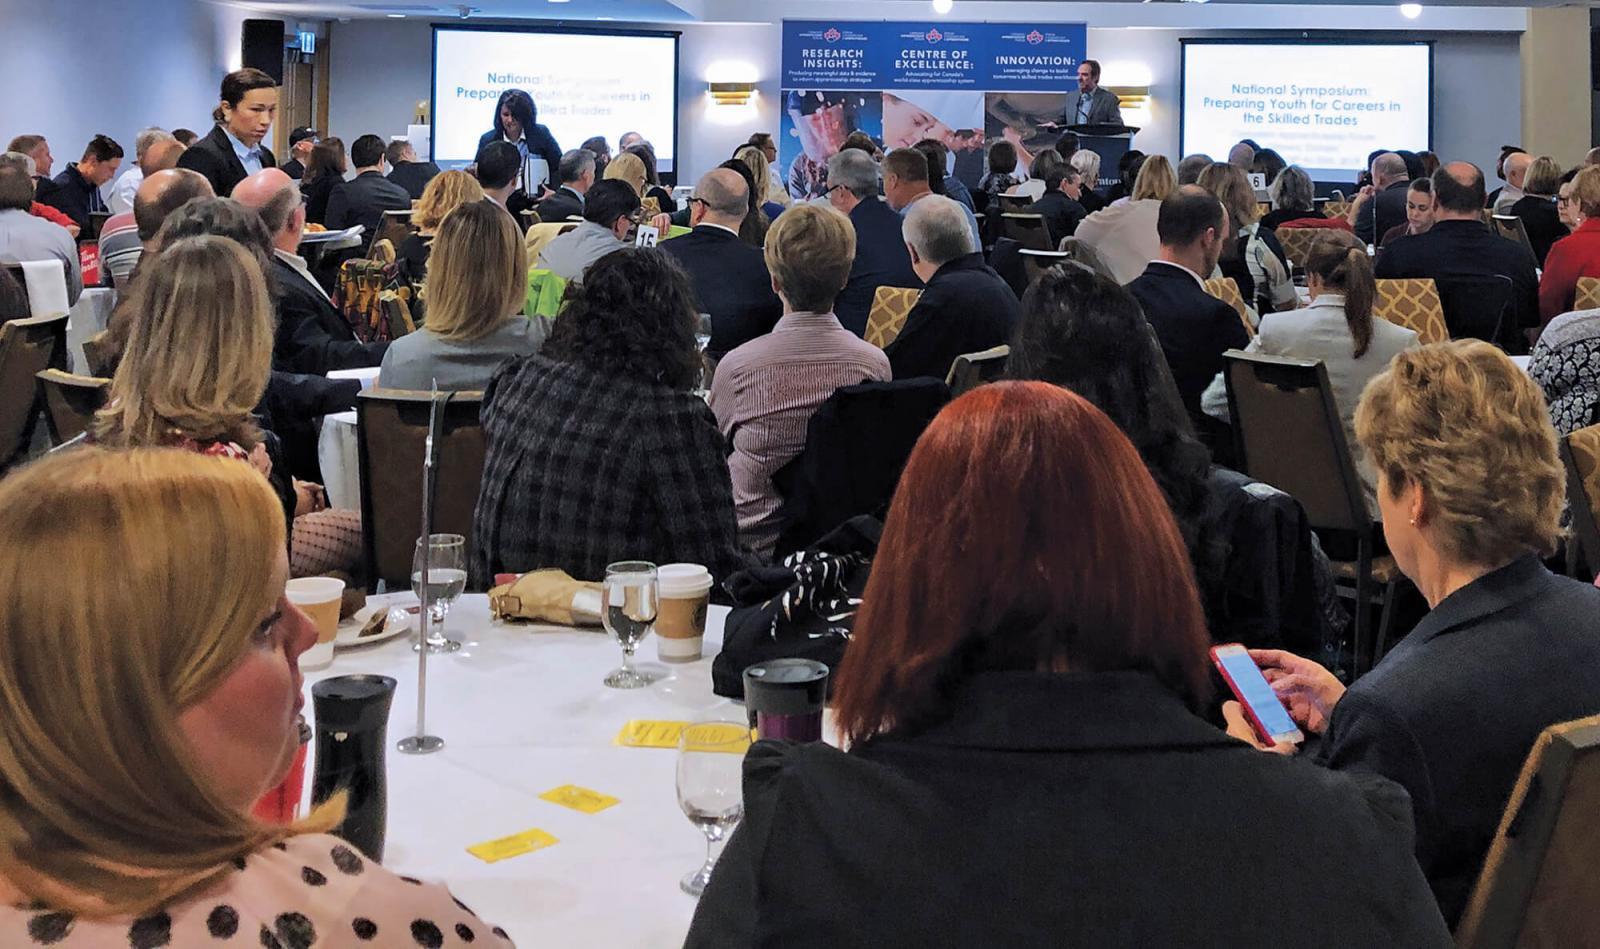 The two-day Canadian Apprenticeship Forum held in Ottawa, Ont., addressed key concerns of apprenticeship programs and careers in the Skilled Trades.